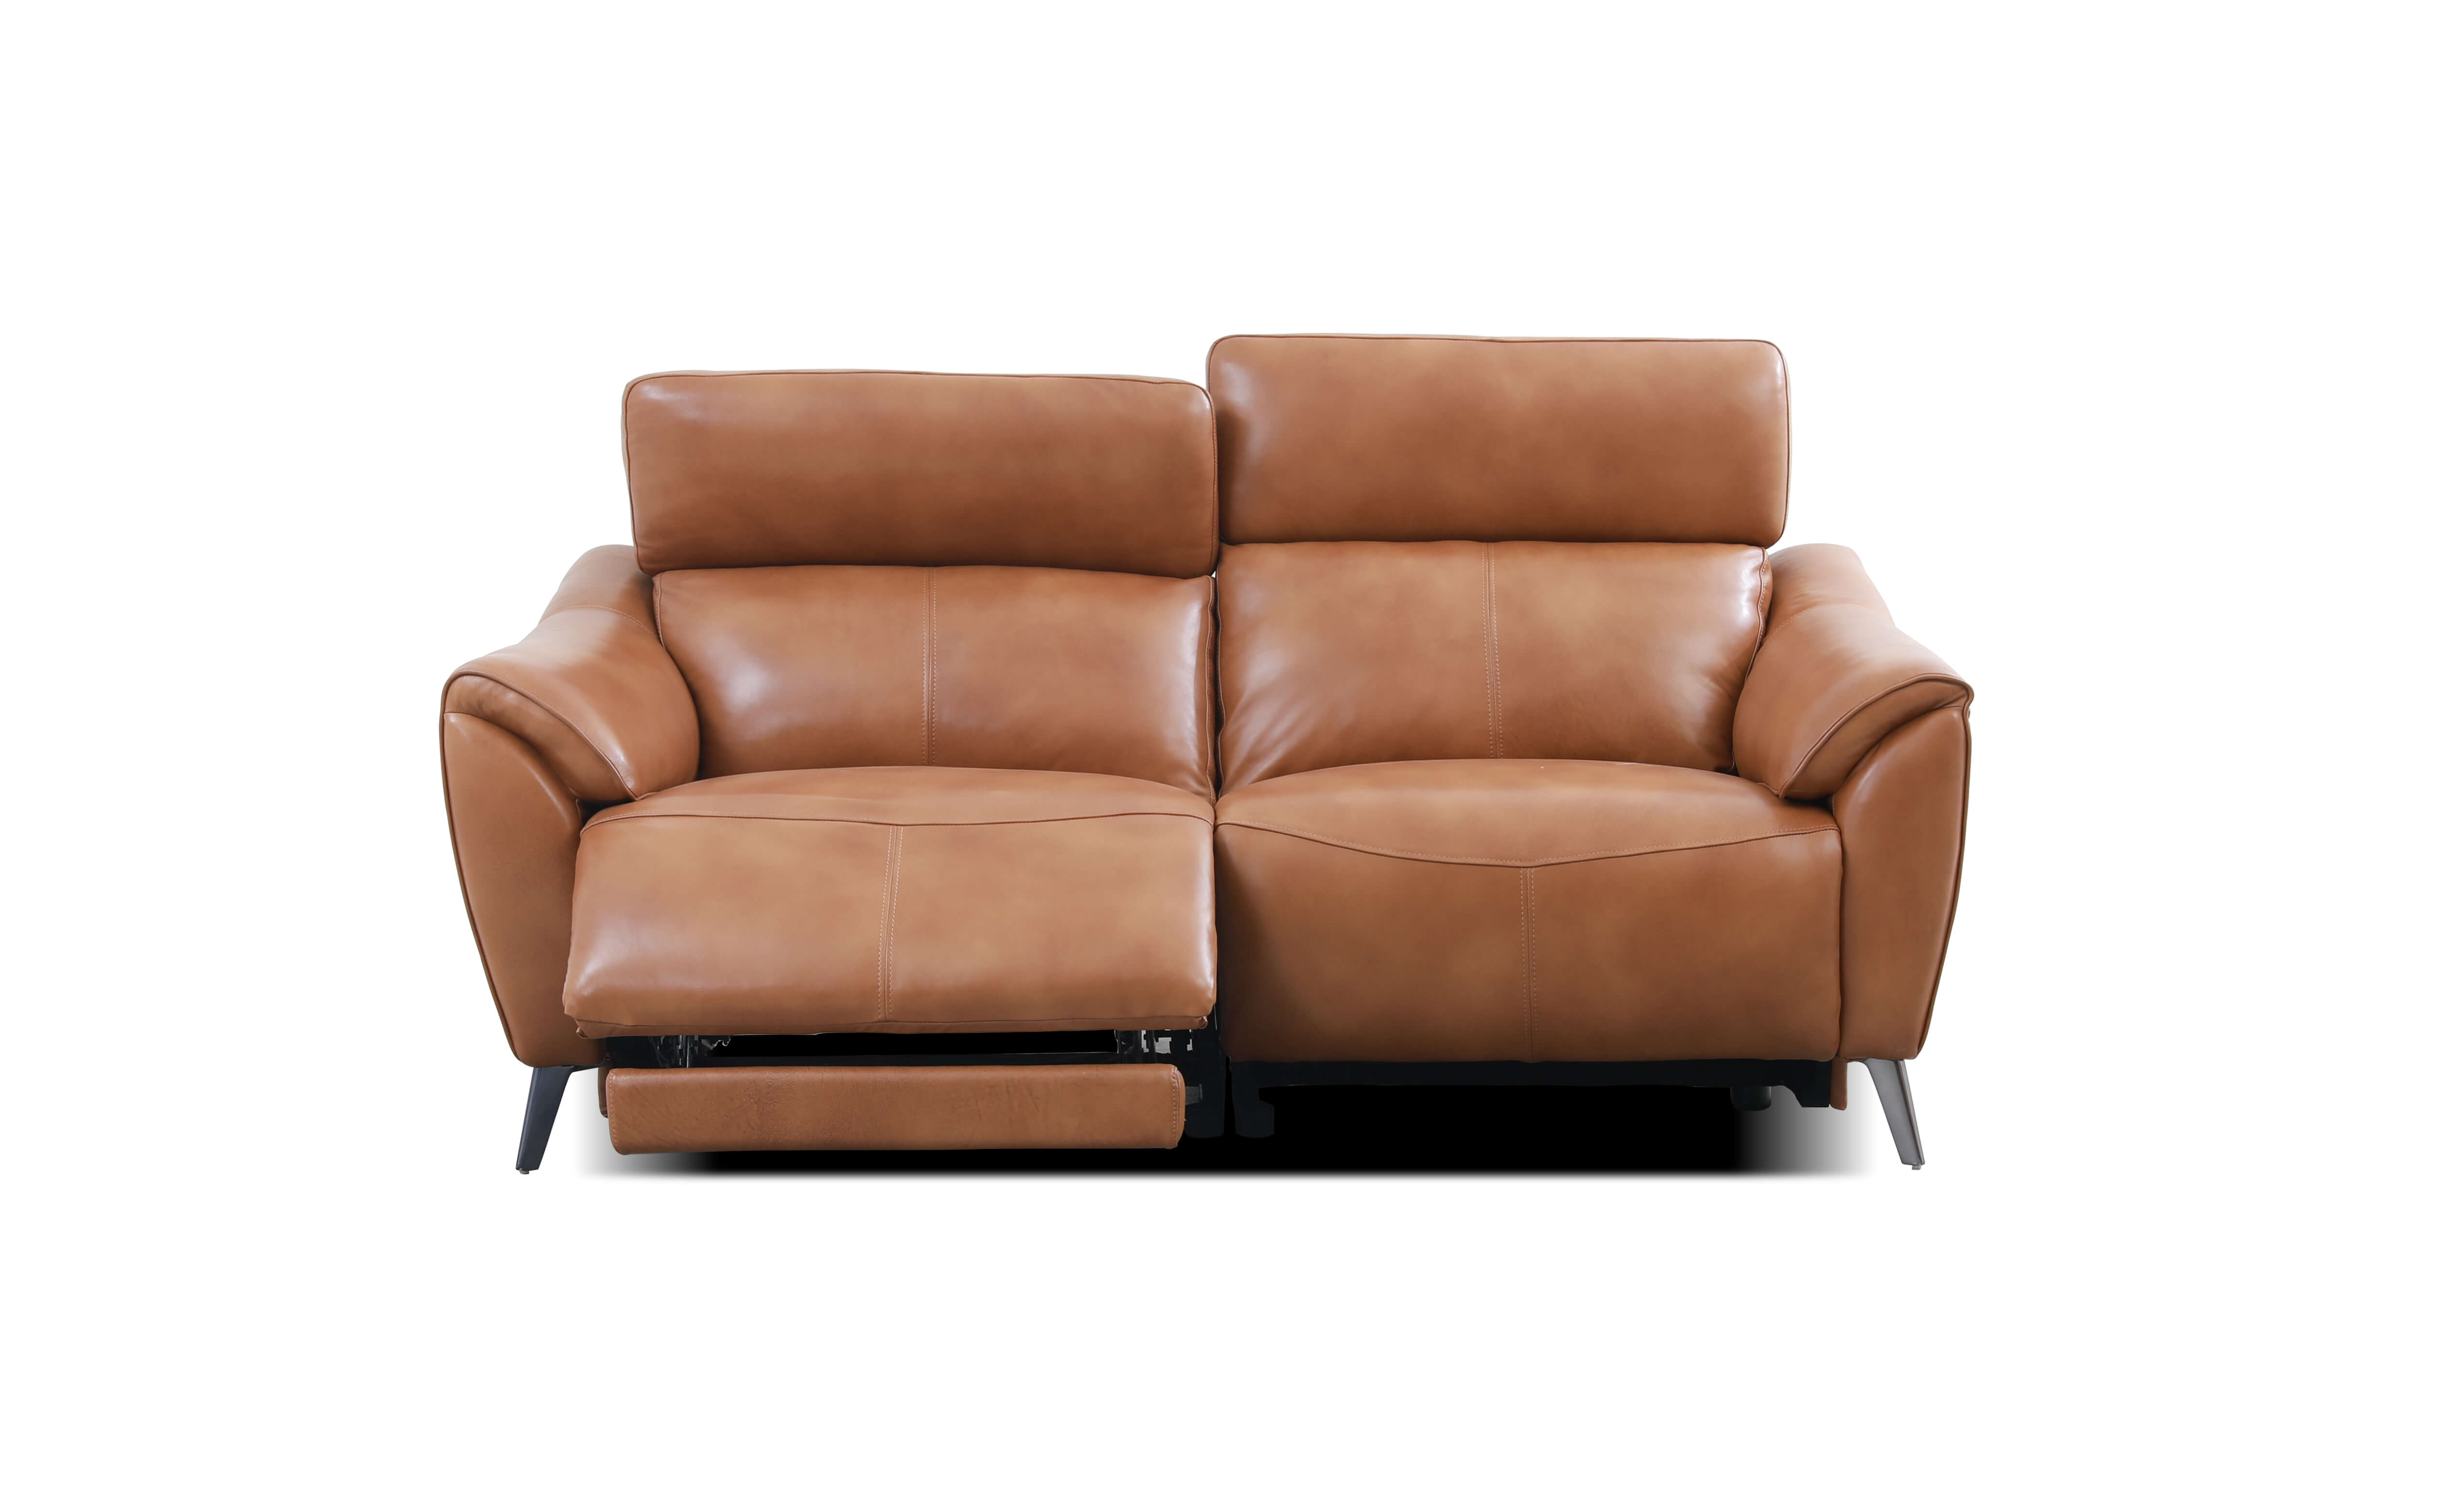 2.5 seater brown leather electric recliner sofa high head rest